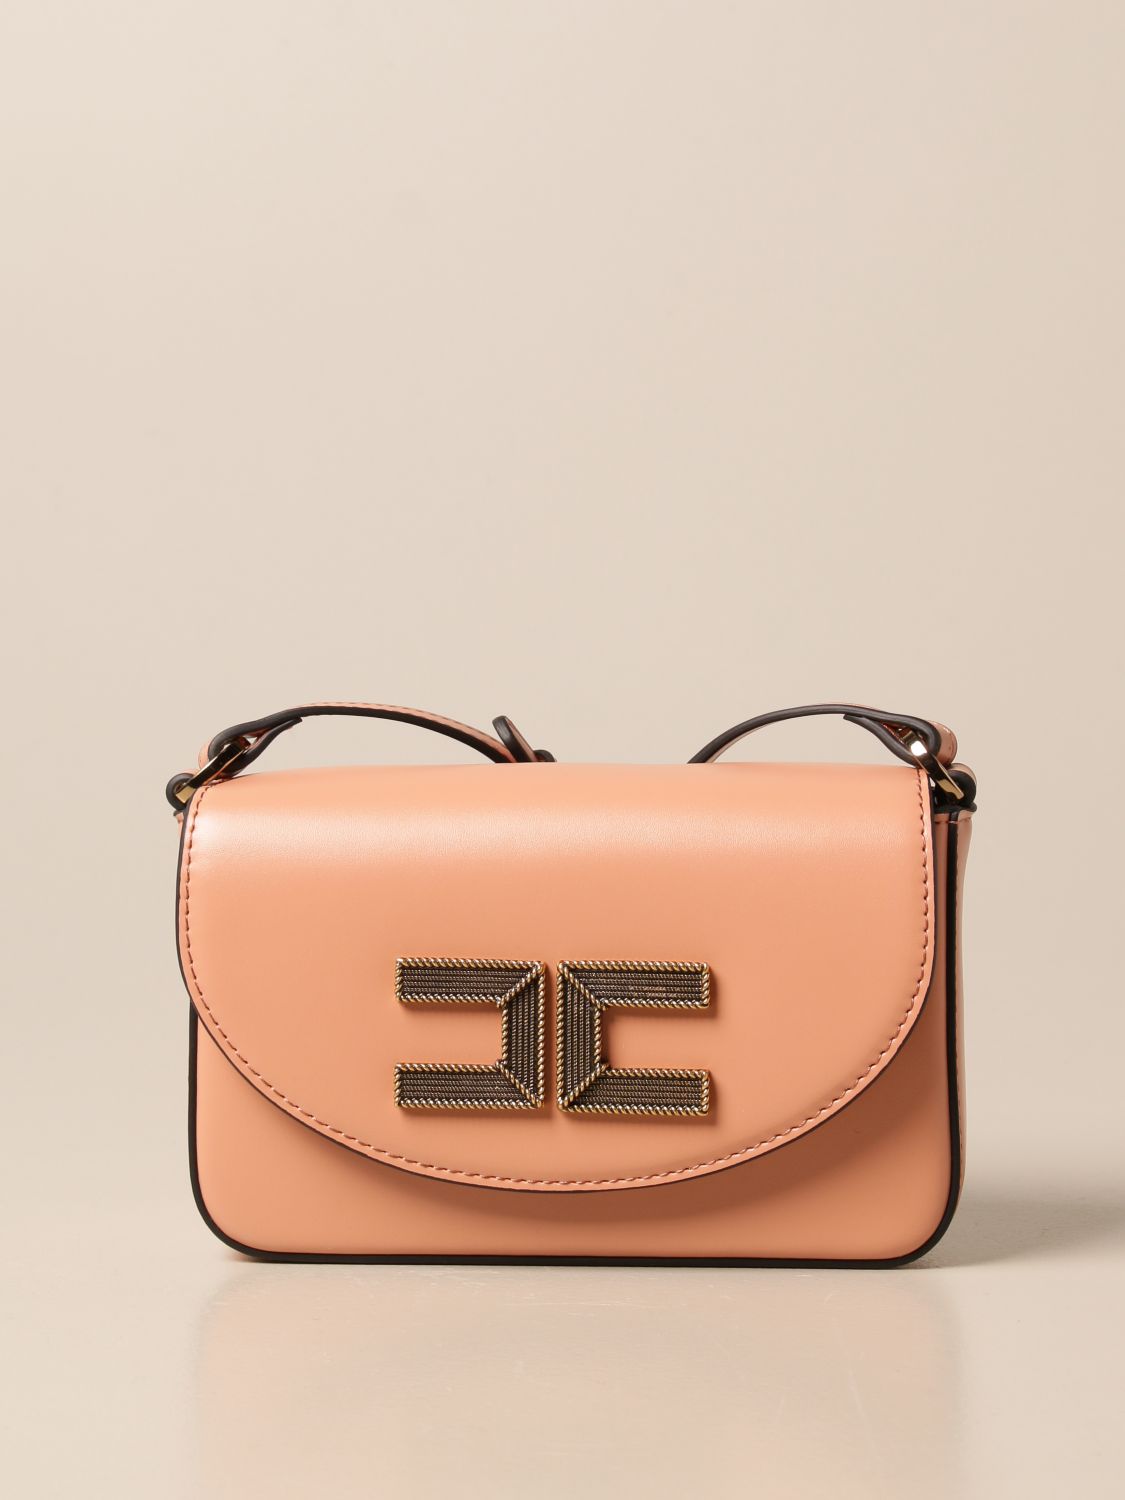 Elisabetta Franchi Celyn B. BAG IN SYNTHETIC LEATHER WITH LOGO